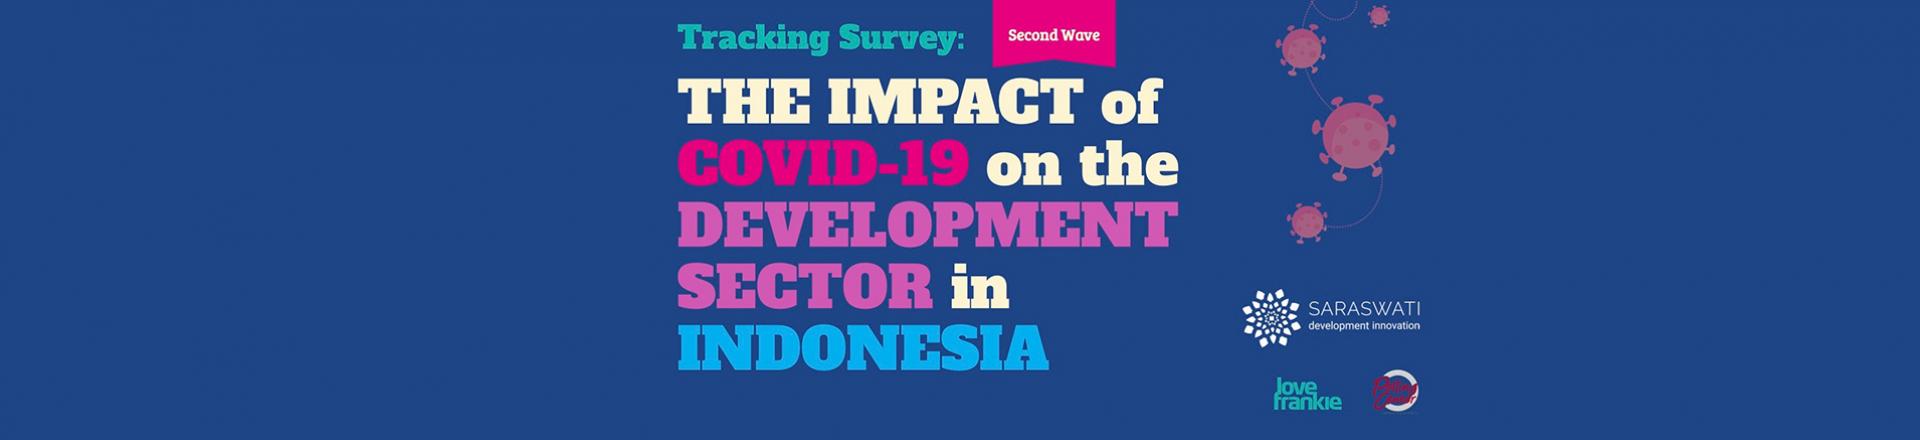 THE IMPACT of COVID-19 on the DEVELOPMENT SECTOR in INDONESIA